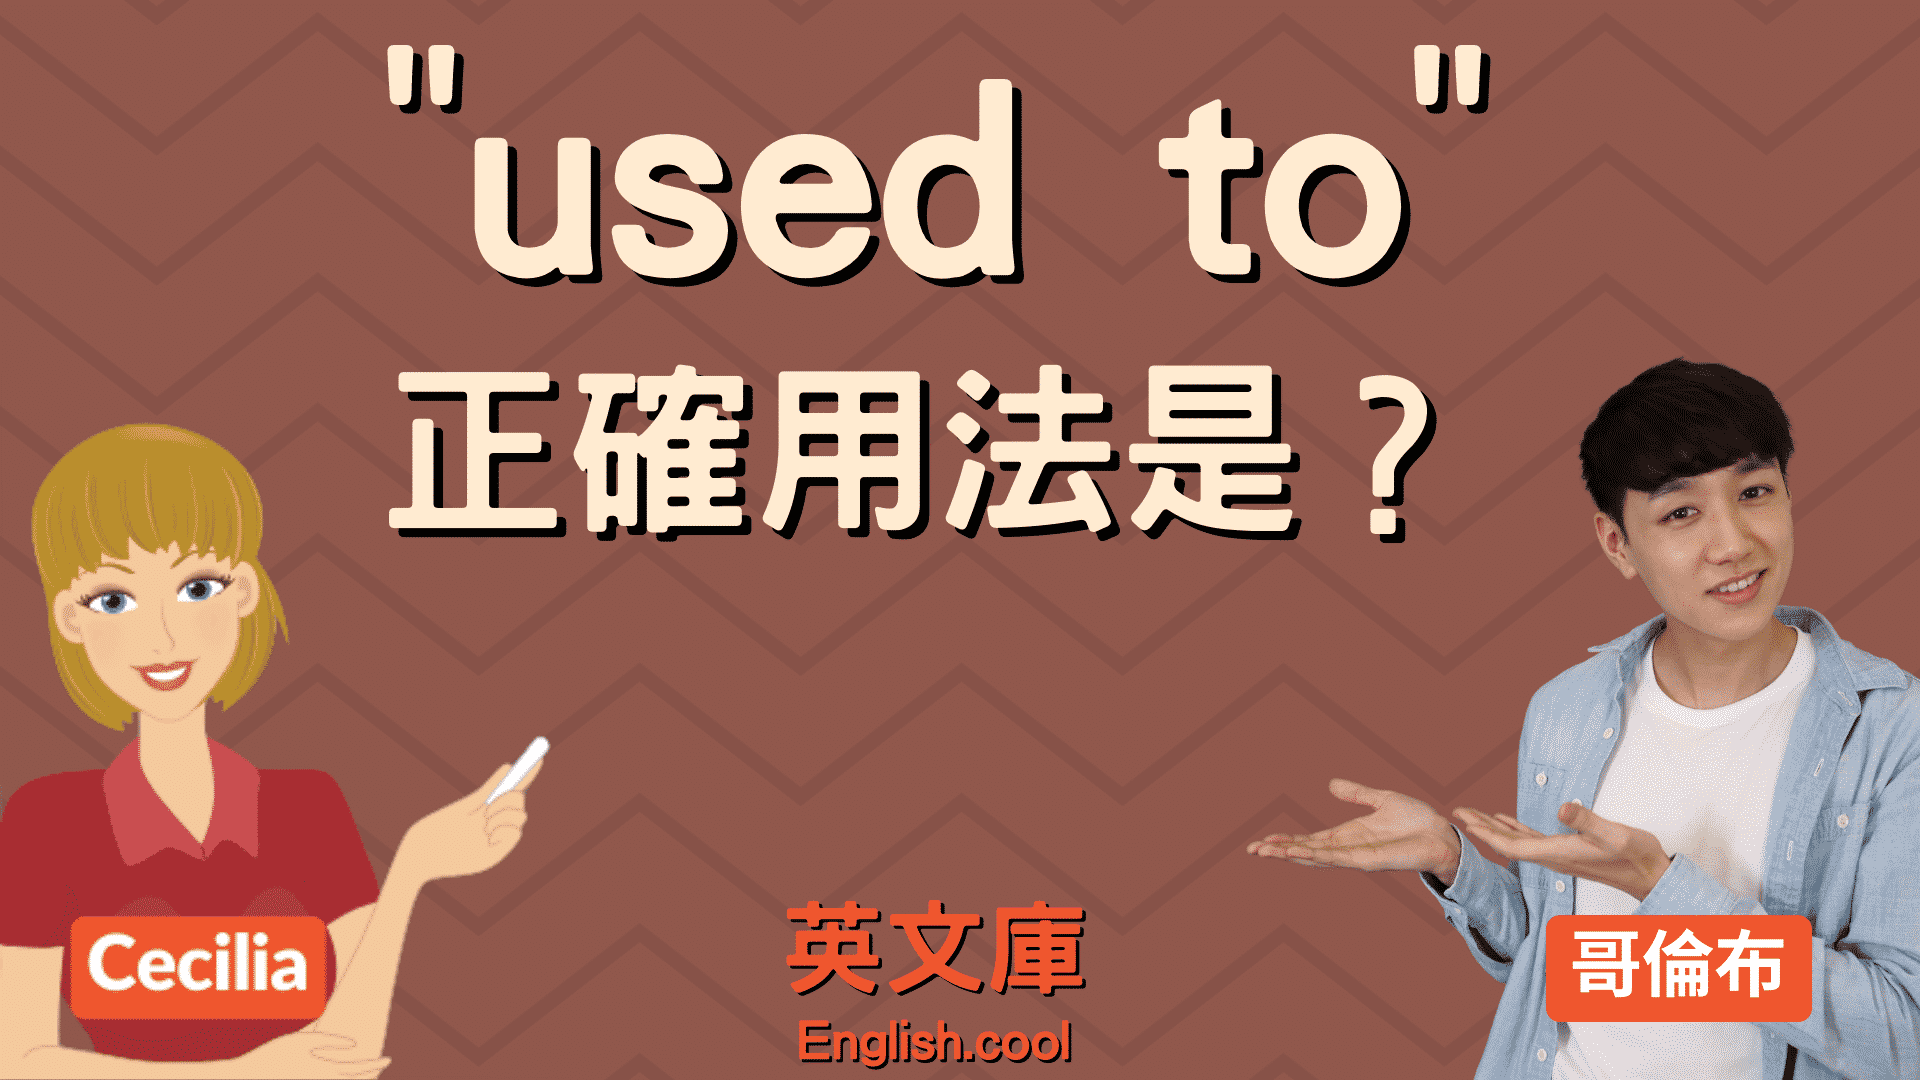 You are currently viewing 「used to」正確用法是？跟 be used to 差在哪？